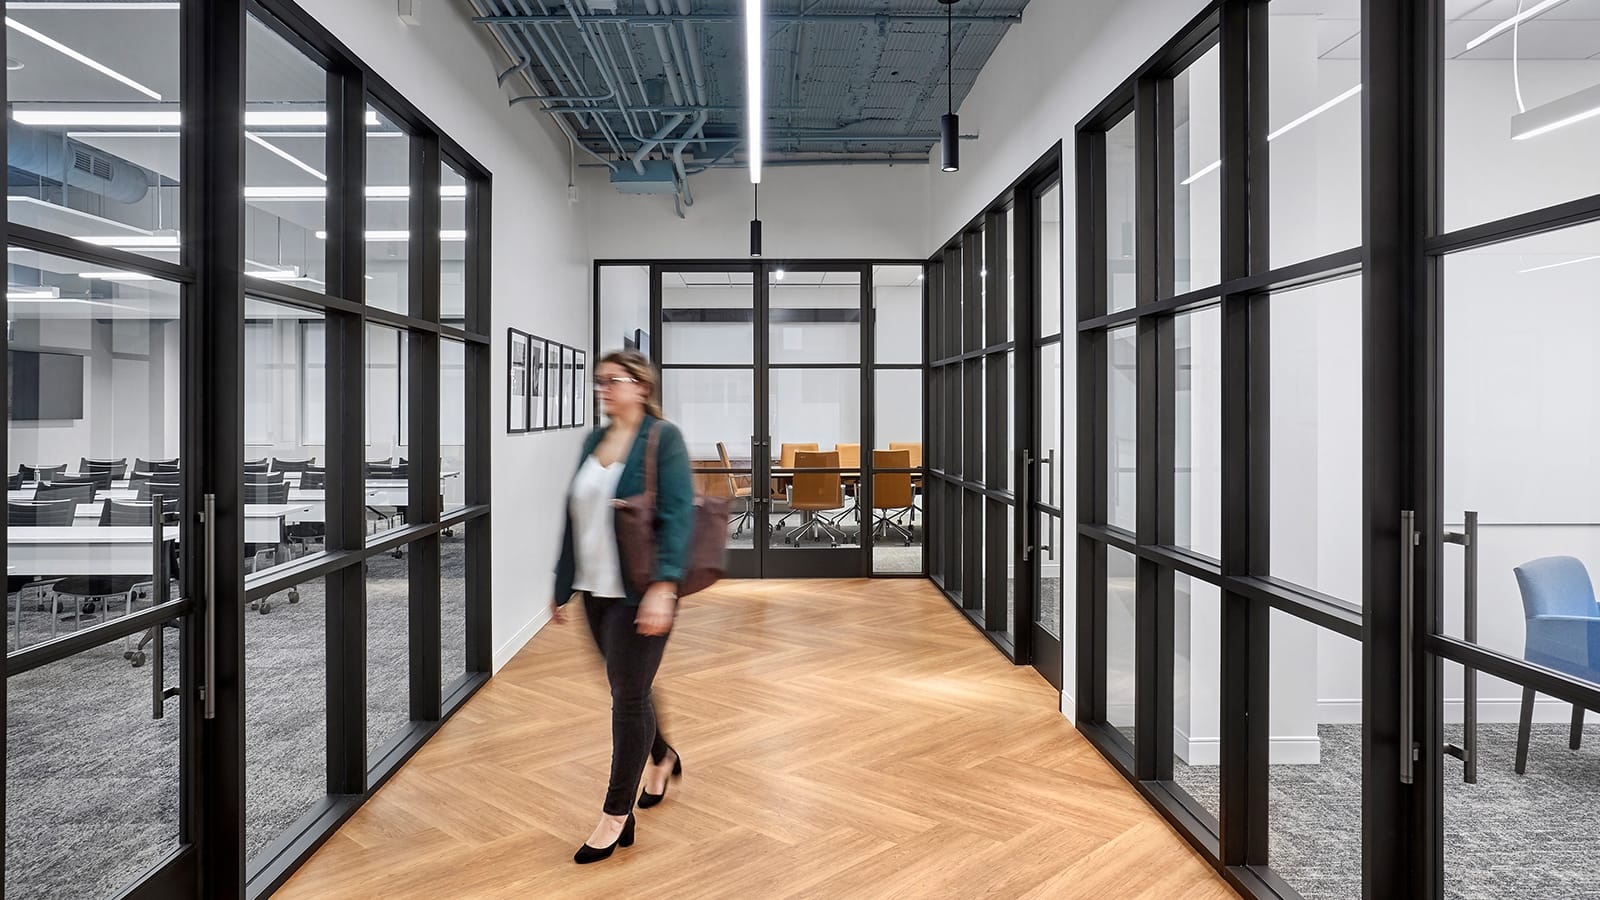 A hall leading to multiple meeting spaces within the Leviton showroom space.